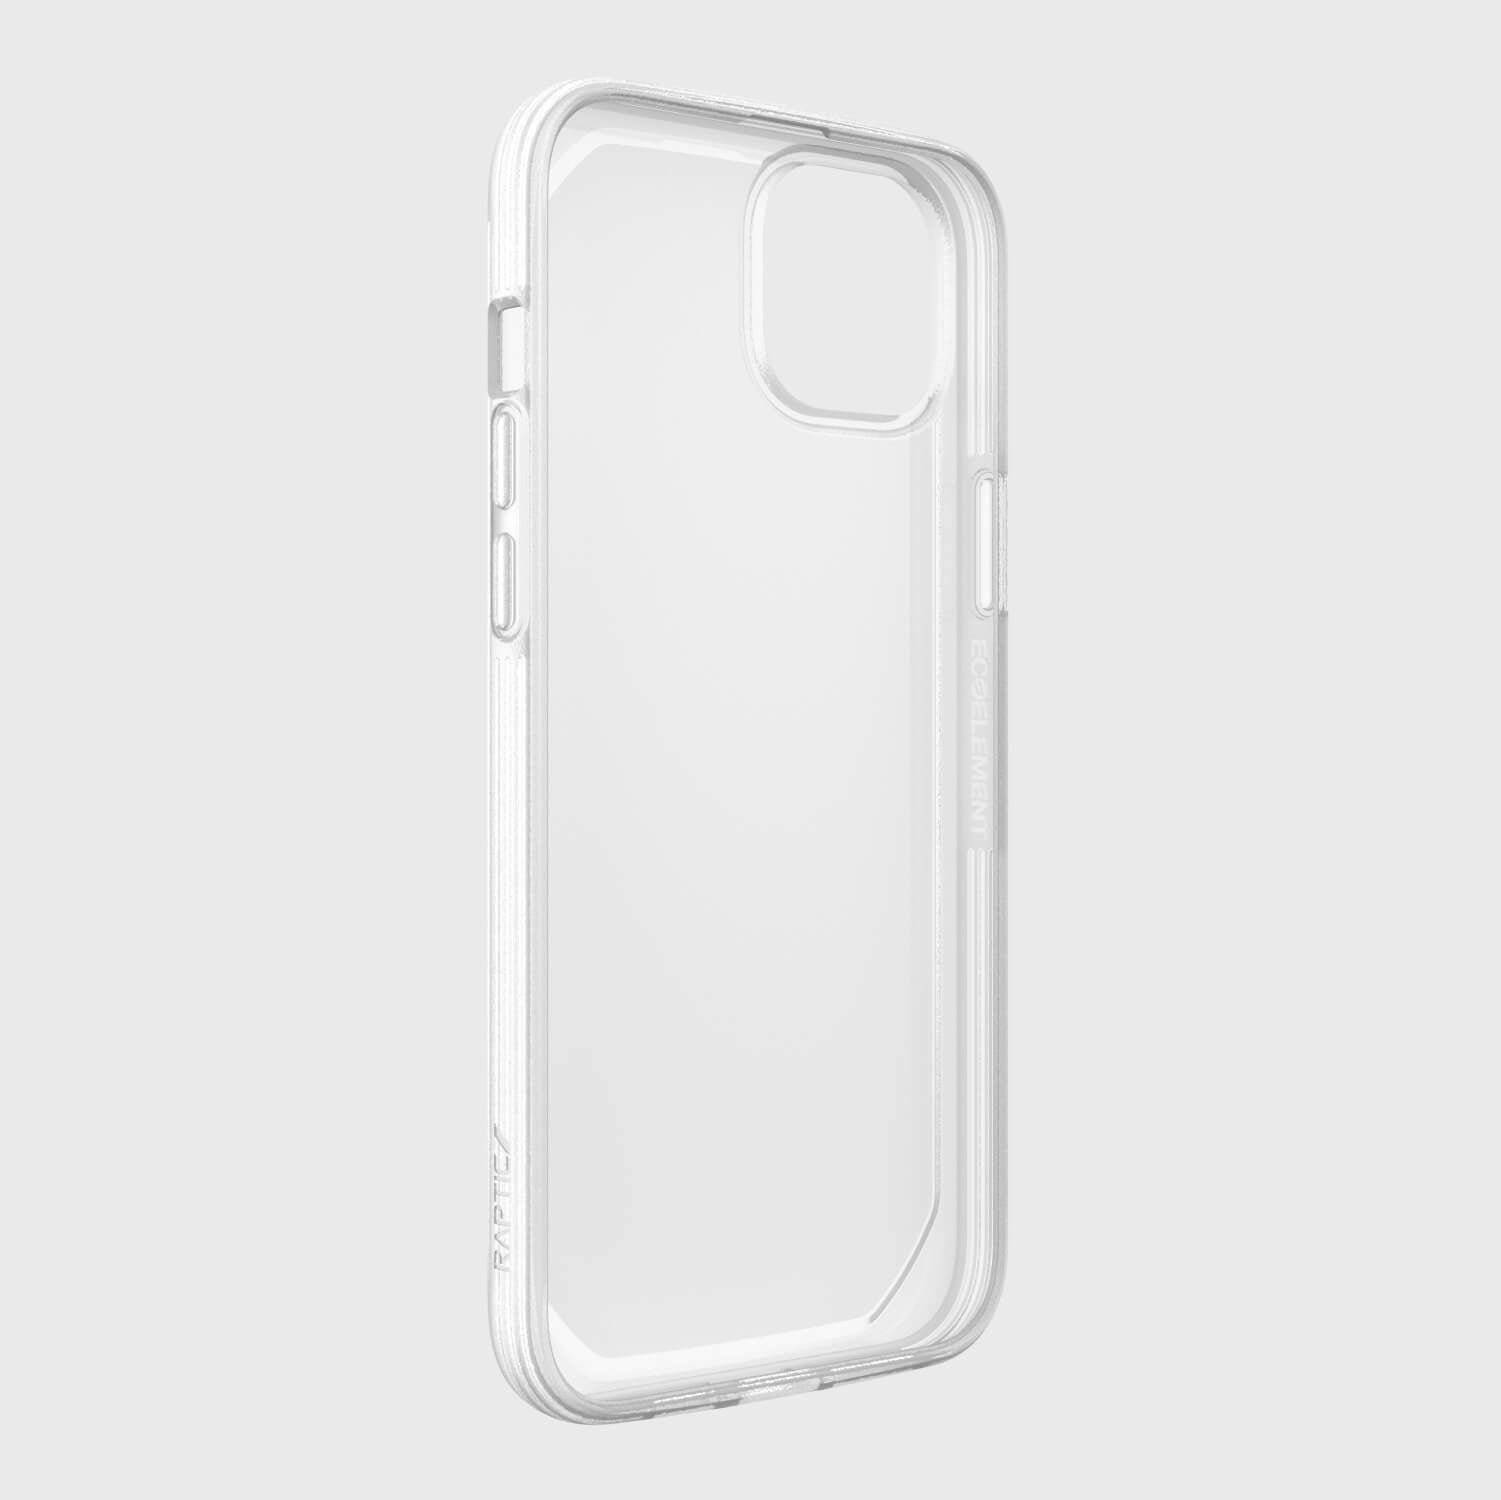 An environmentally friendly and recyclable iPhone 14 Plus Forsted Case by Raptic Slim, with a clear texture and depth, displayed on a white background.